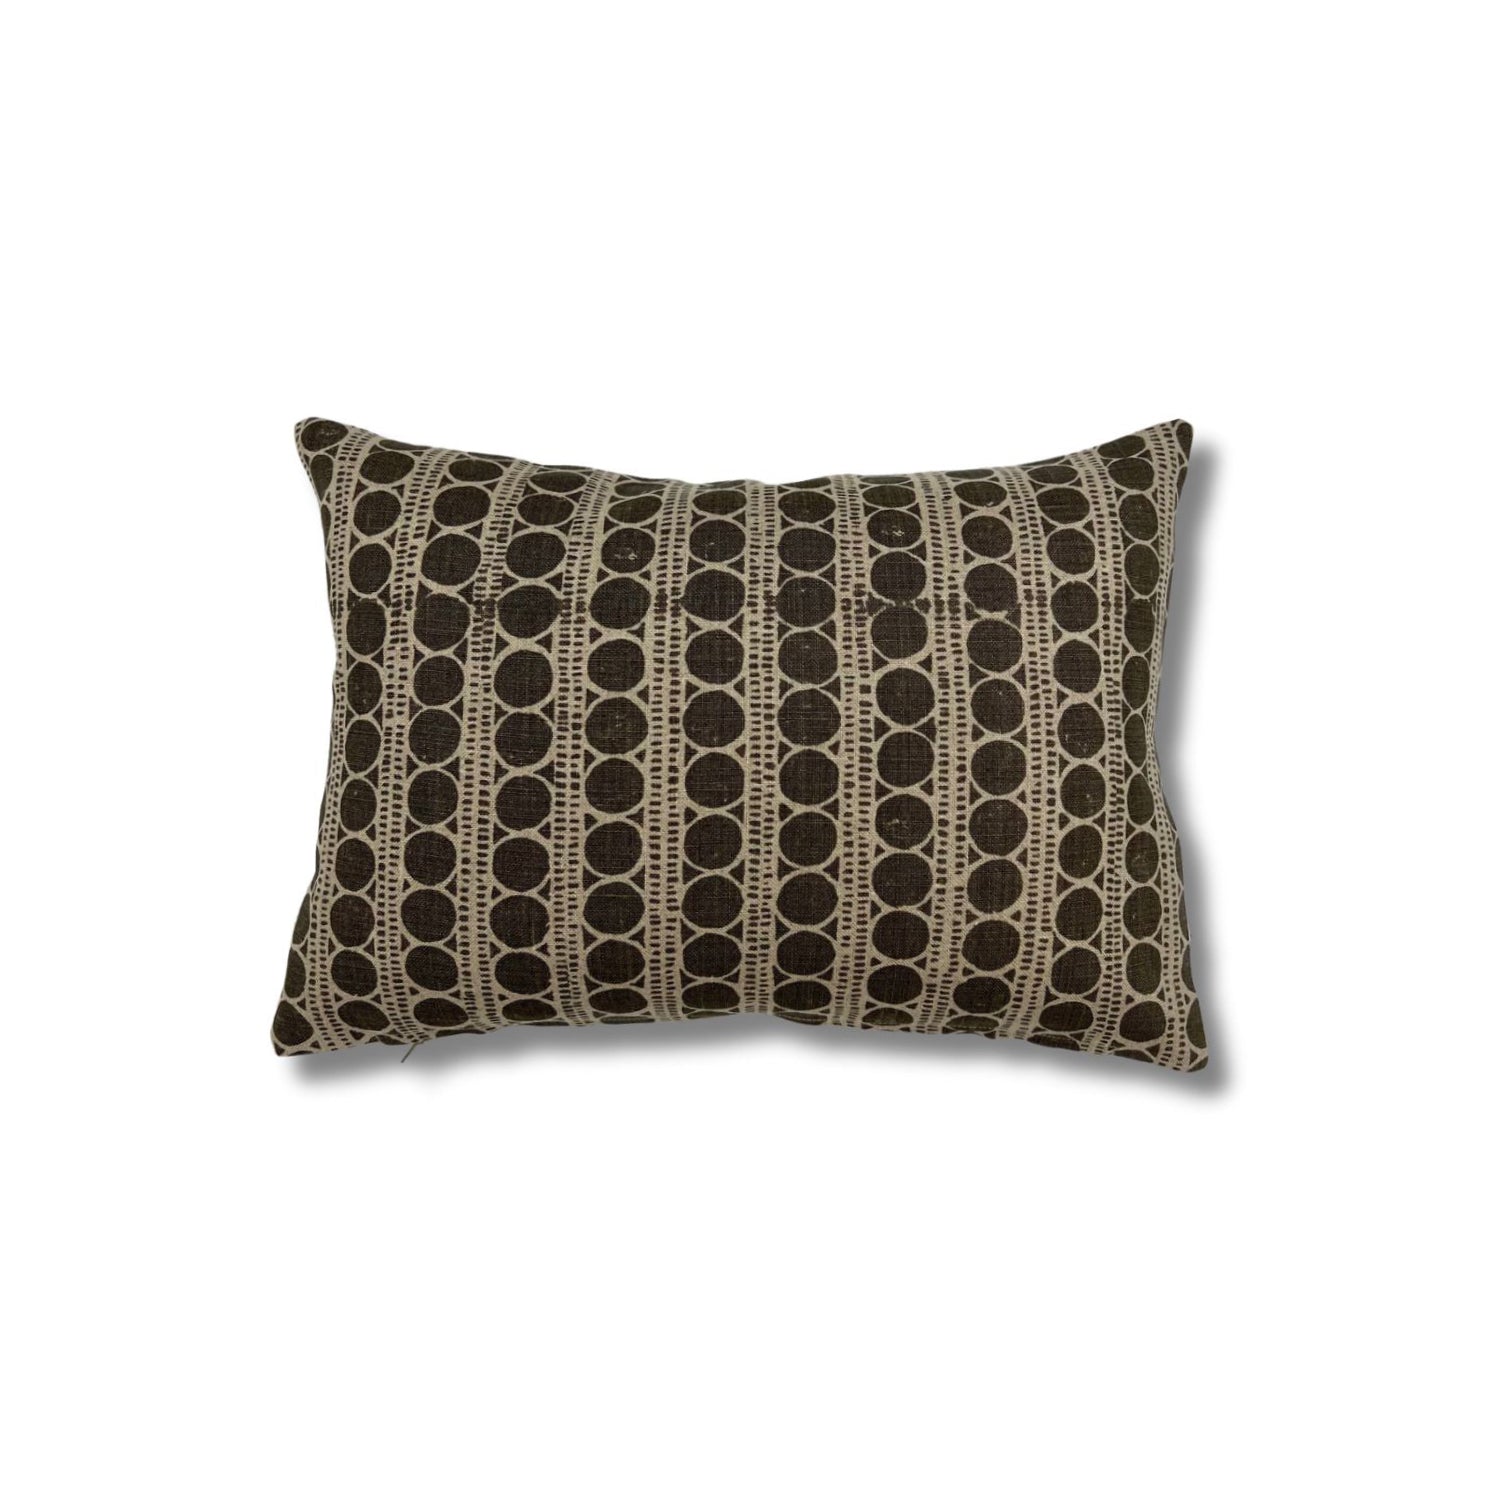 Rectangular throw pillow with a striped pattern made of circles and dashed lines in charcoal grey on a natural linen background.